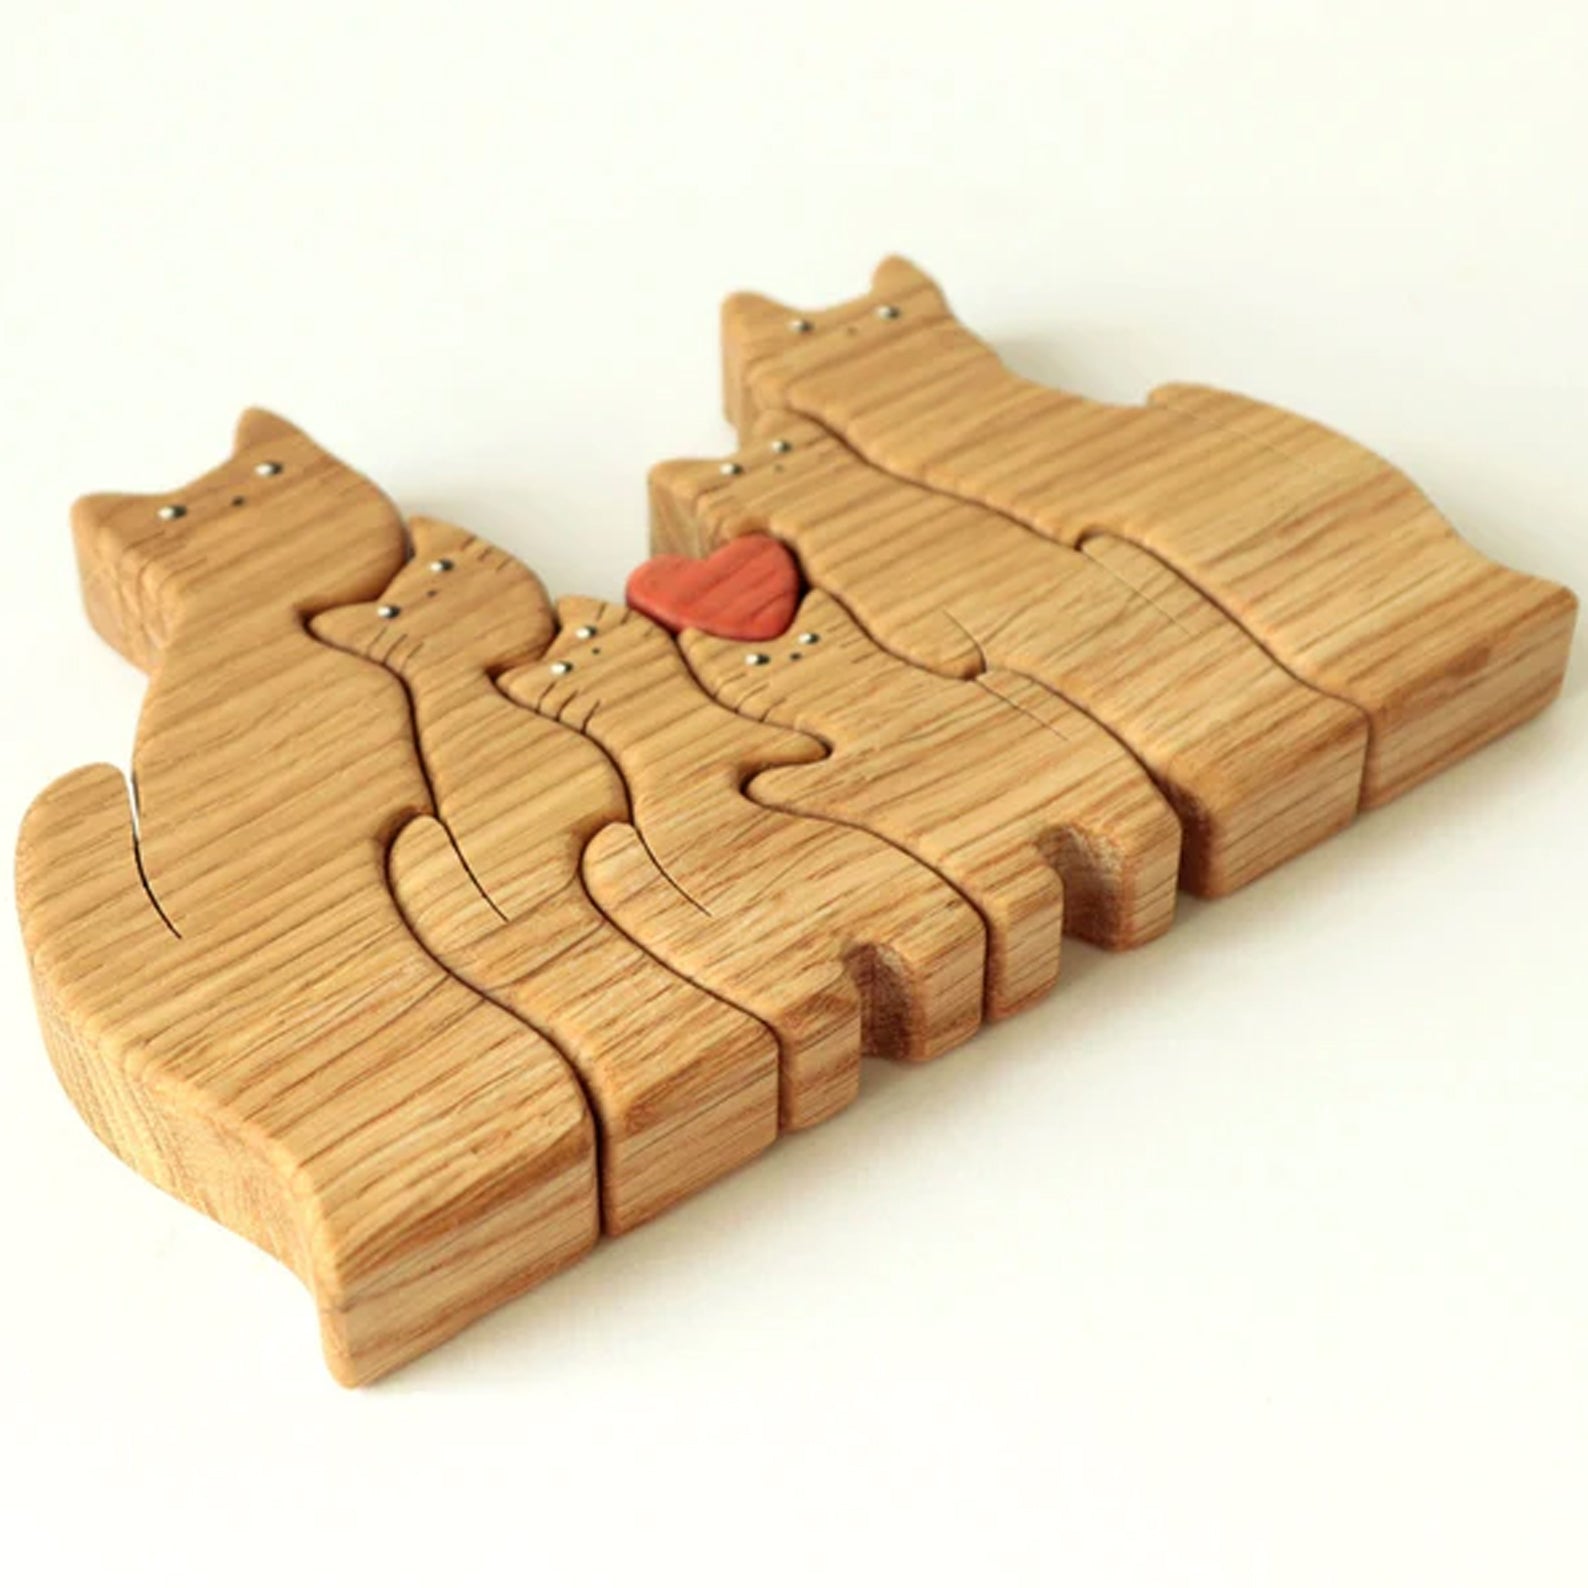 Personalized Cat Family, Wooden Puzzle Gift for Home Decoration - Upto 6 Members - Shaggy Chic